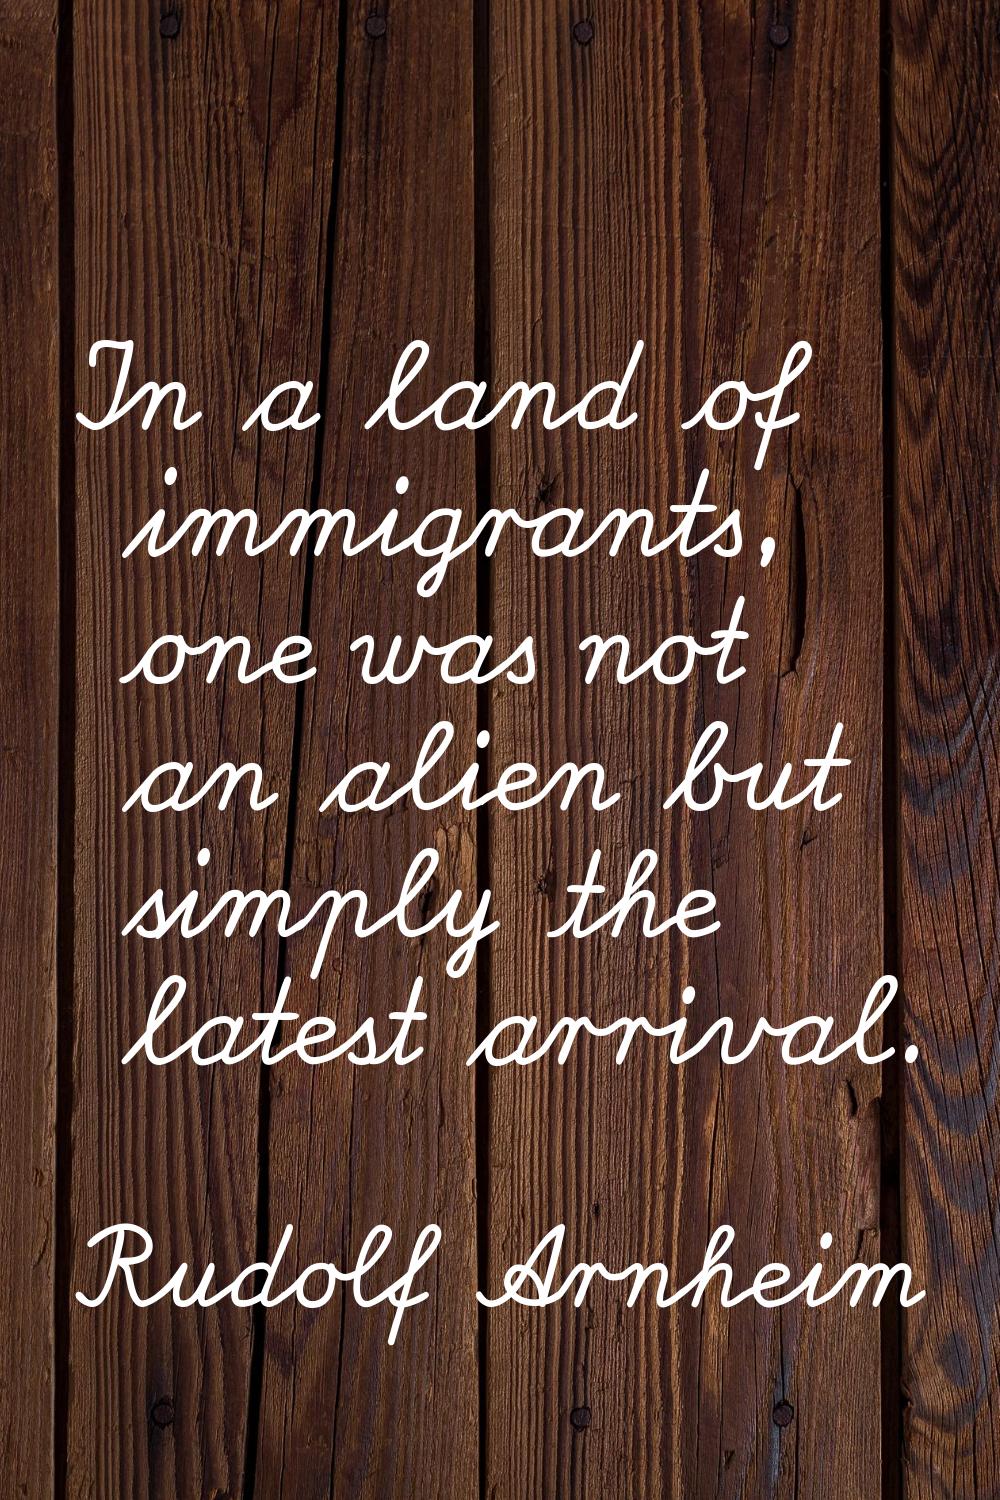 In a land of immigrants, one was not an alien but simply the latest arrival.